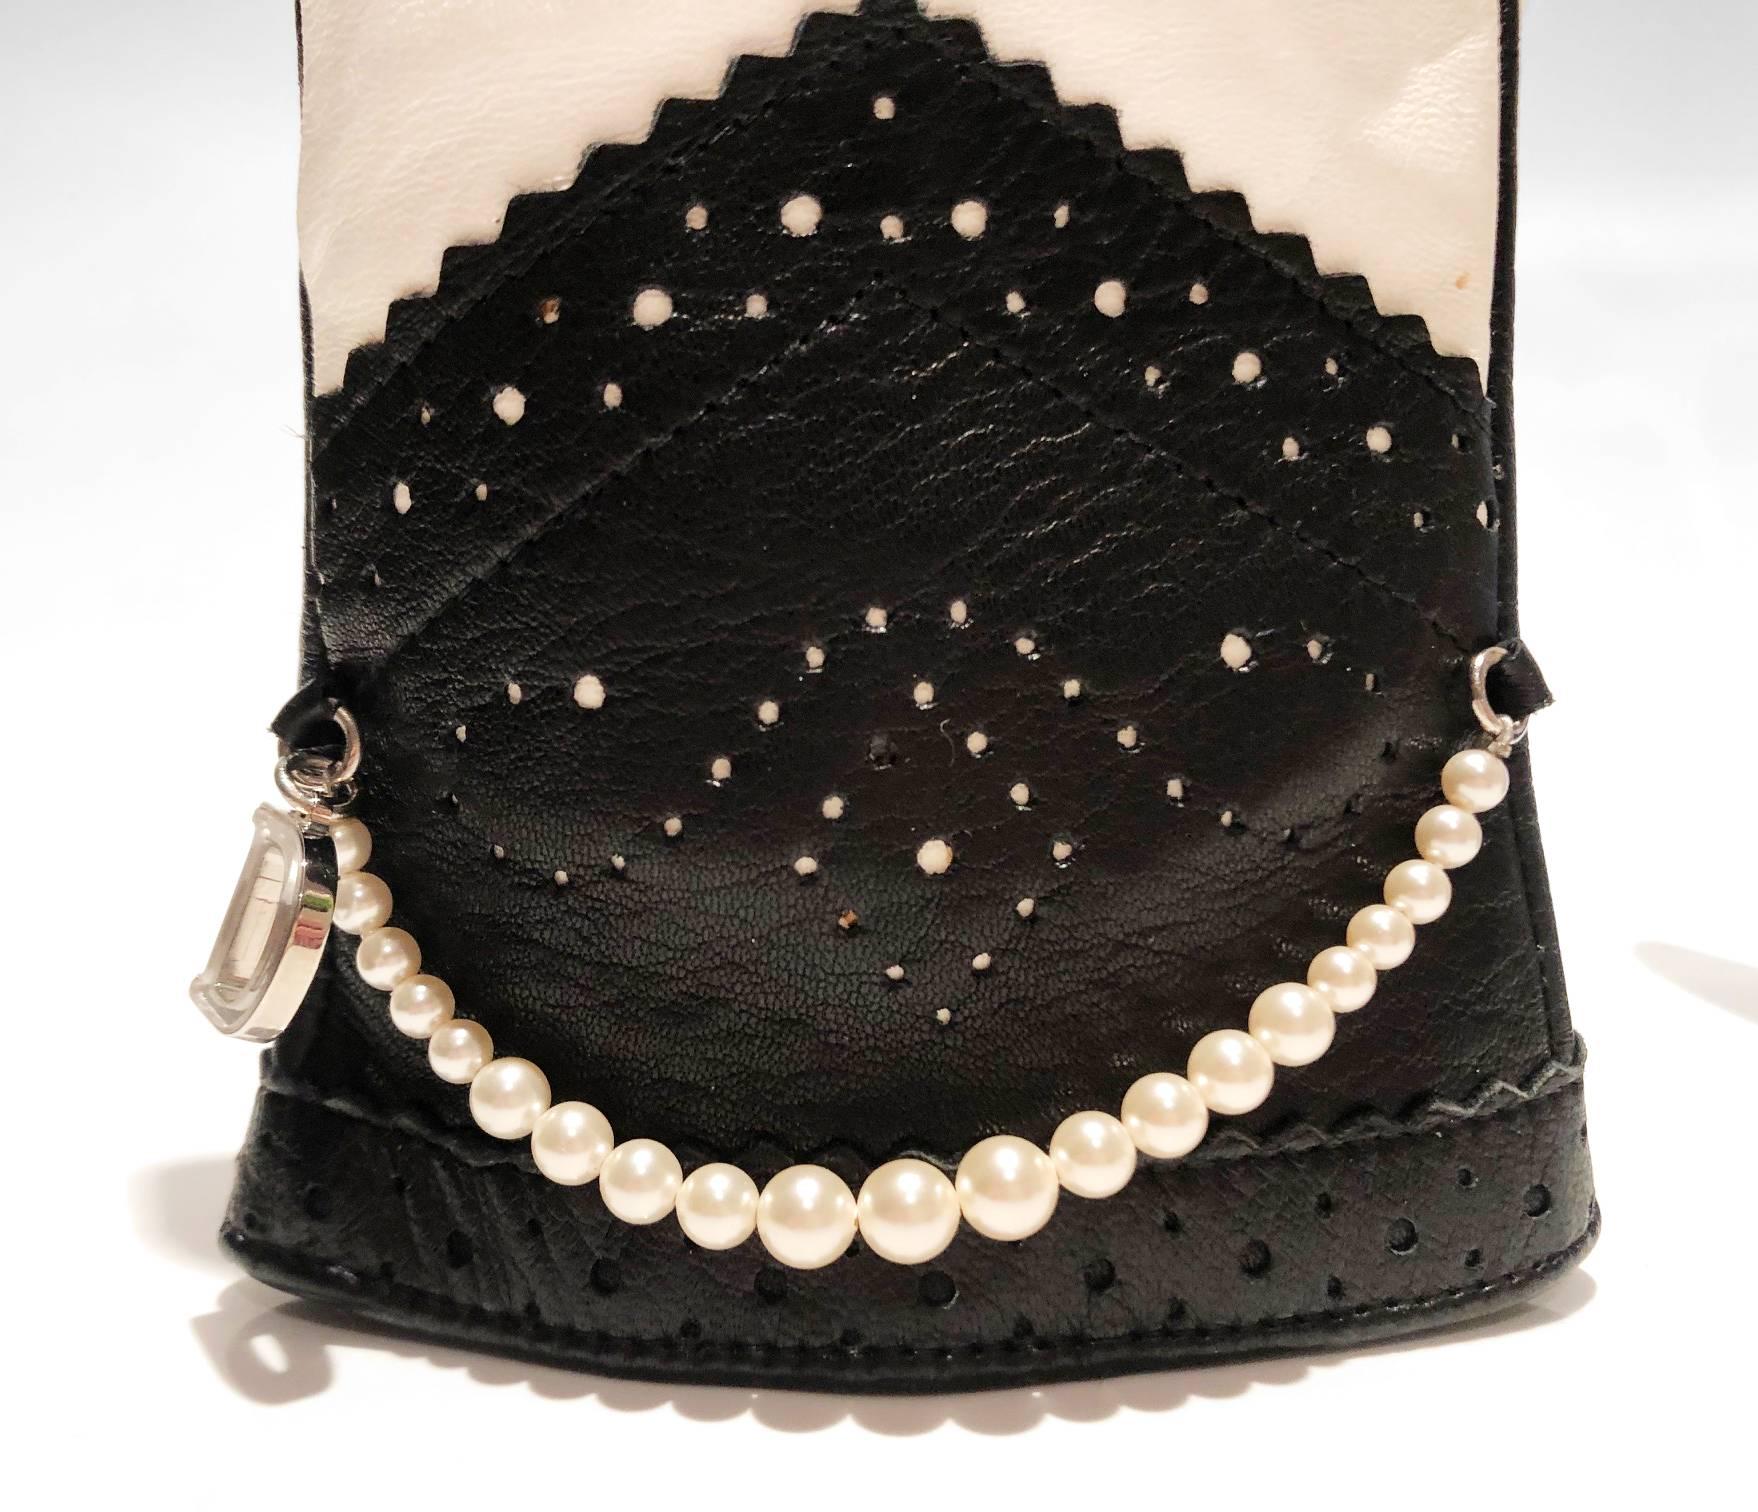 Black 1990s CHRISTIAN DIOR BLACK WHITE LEATHER GLOVES WITH PEARLS